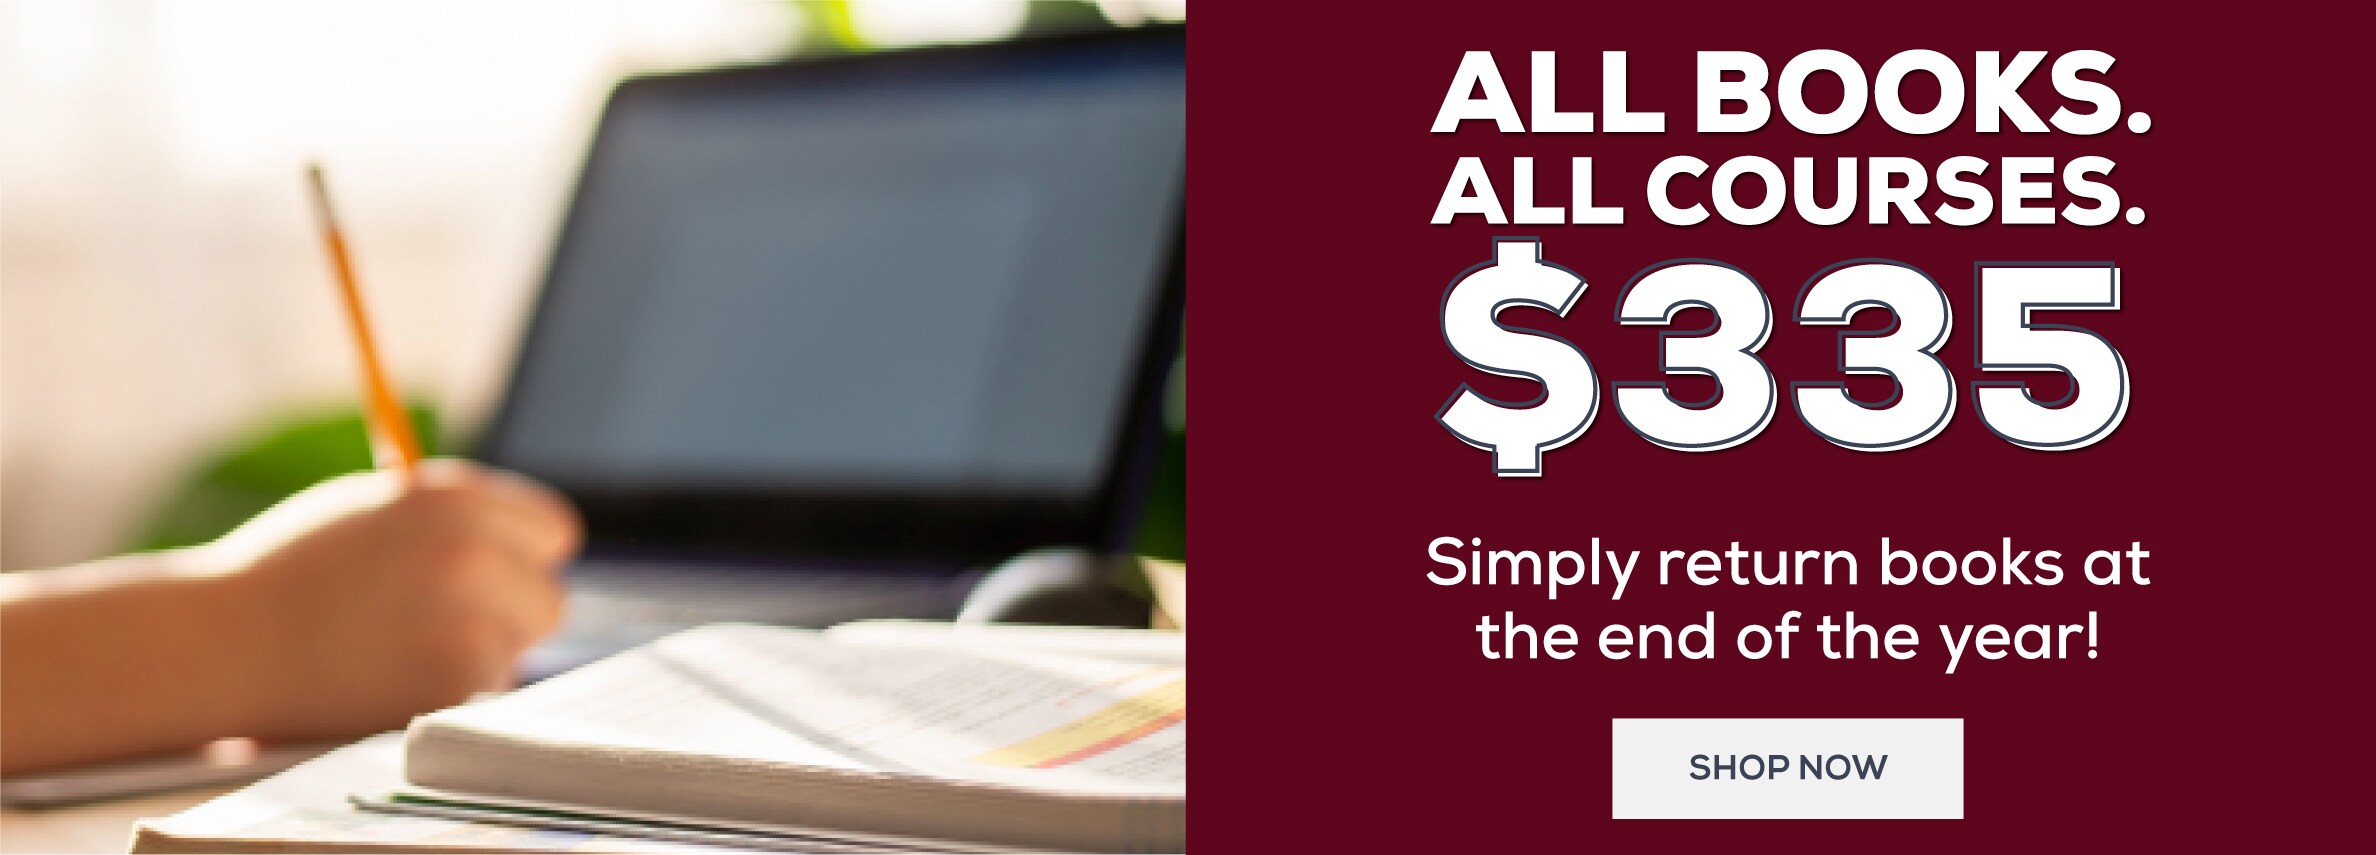 All Books. All Courses. One Low Price. Simply return books at the end of the year! Shop now $335 Bundle